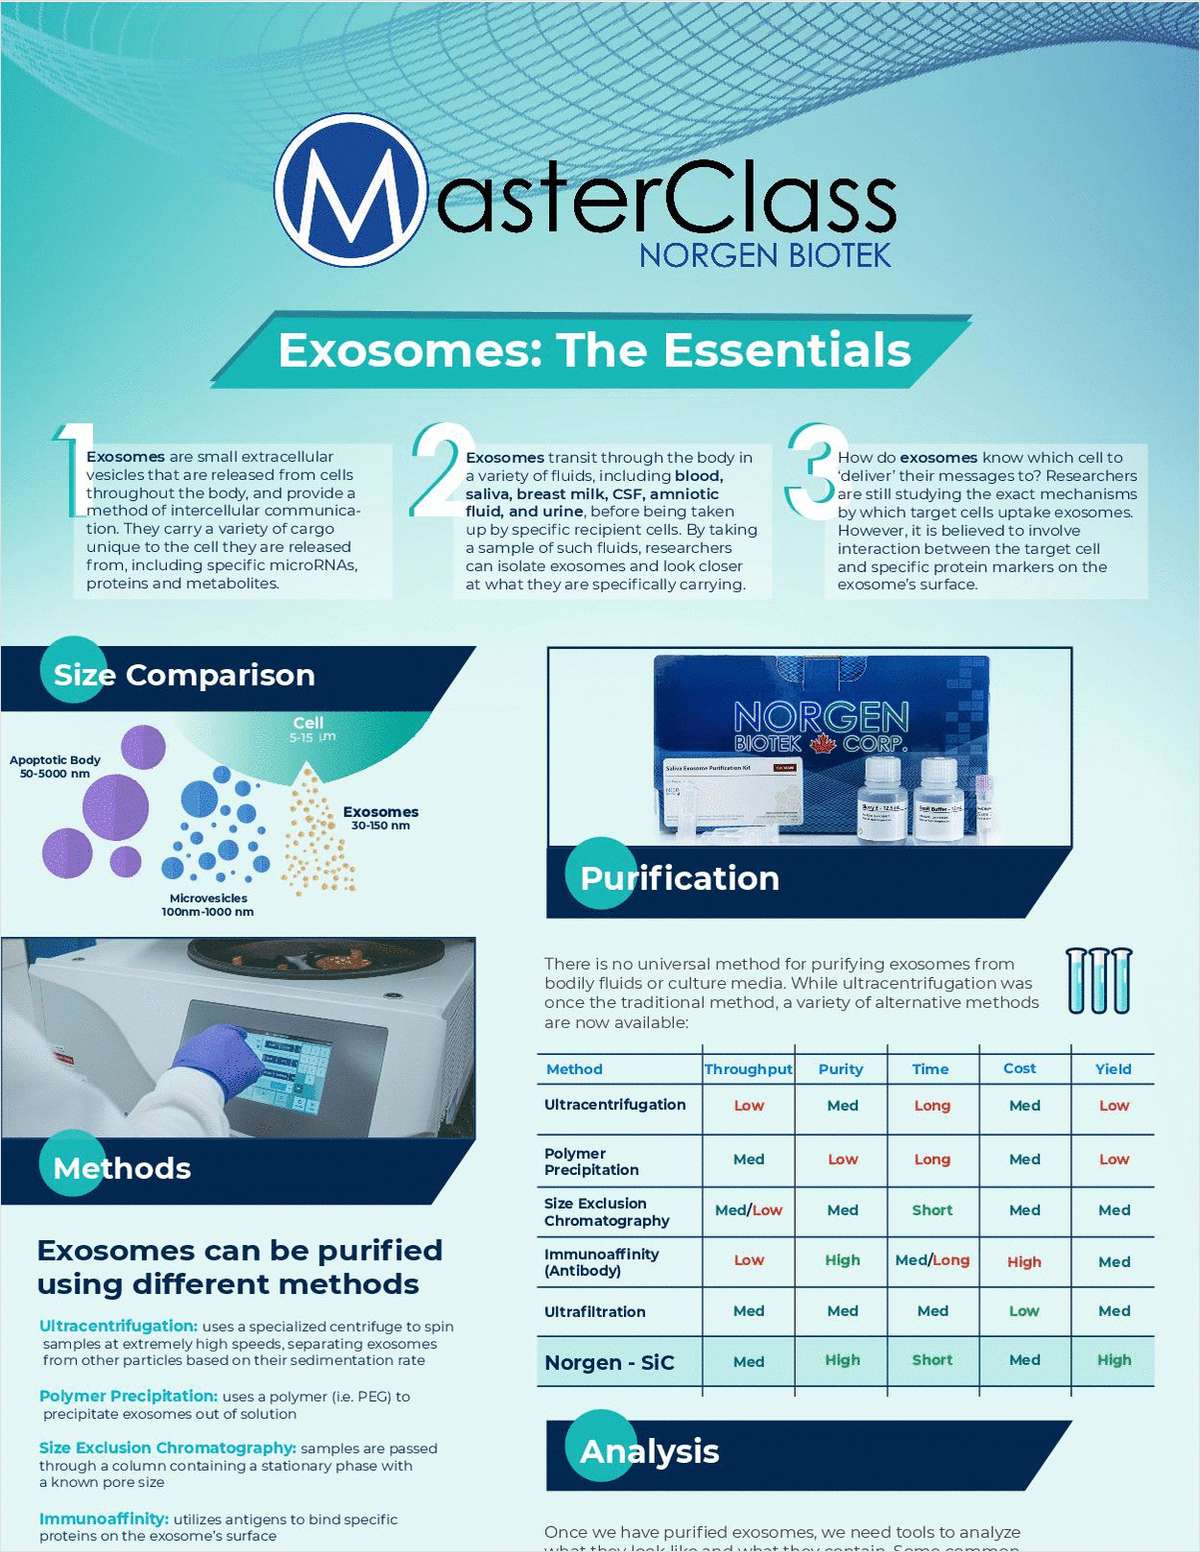 Exosomes: The Essentials